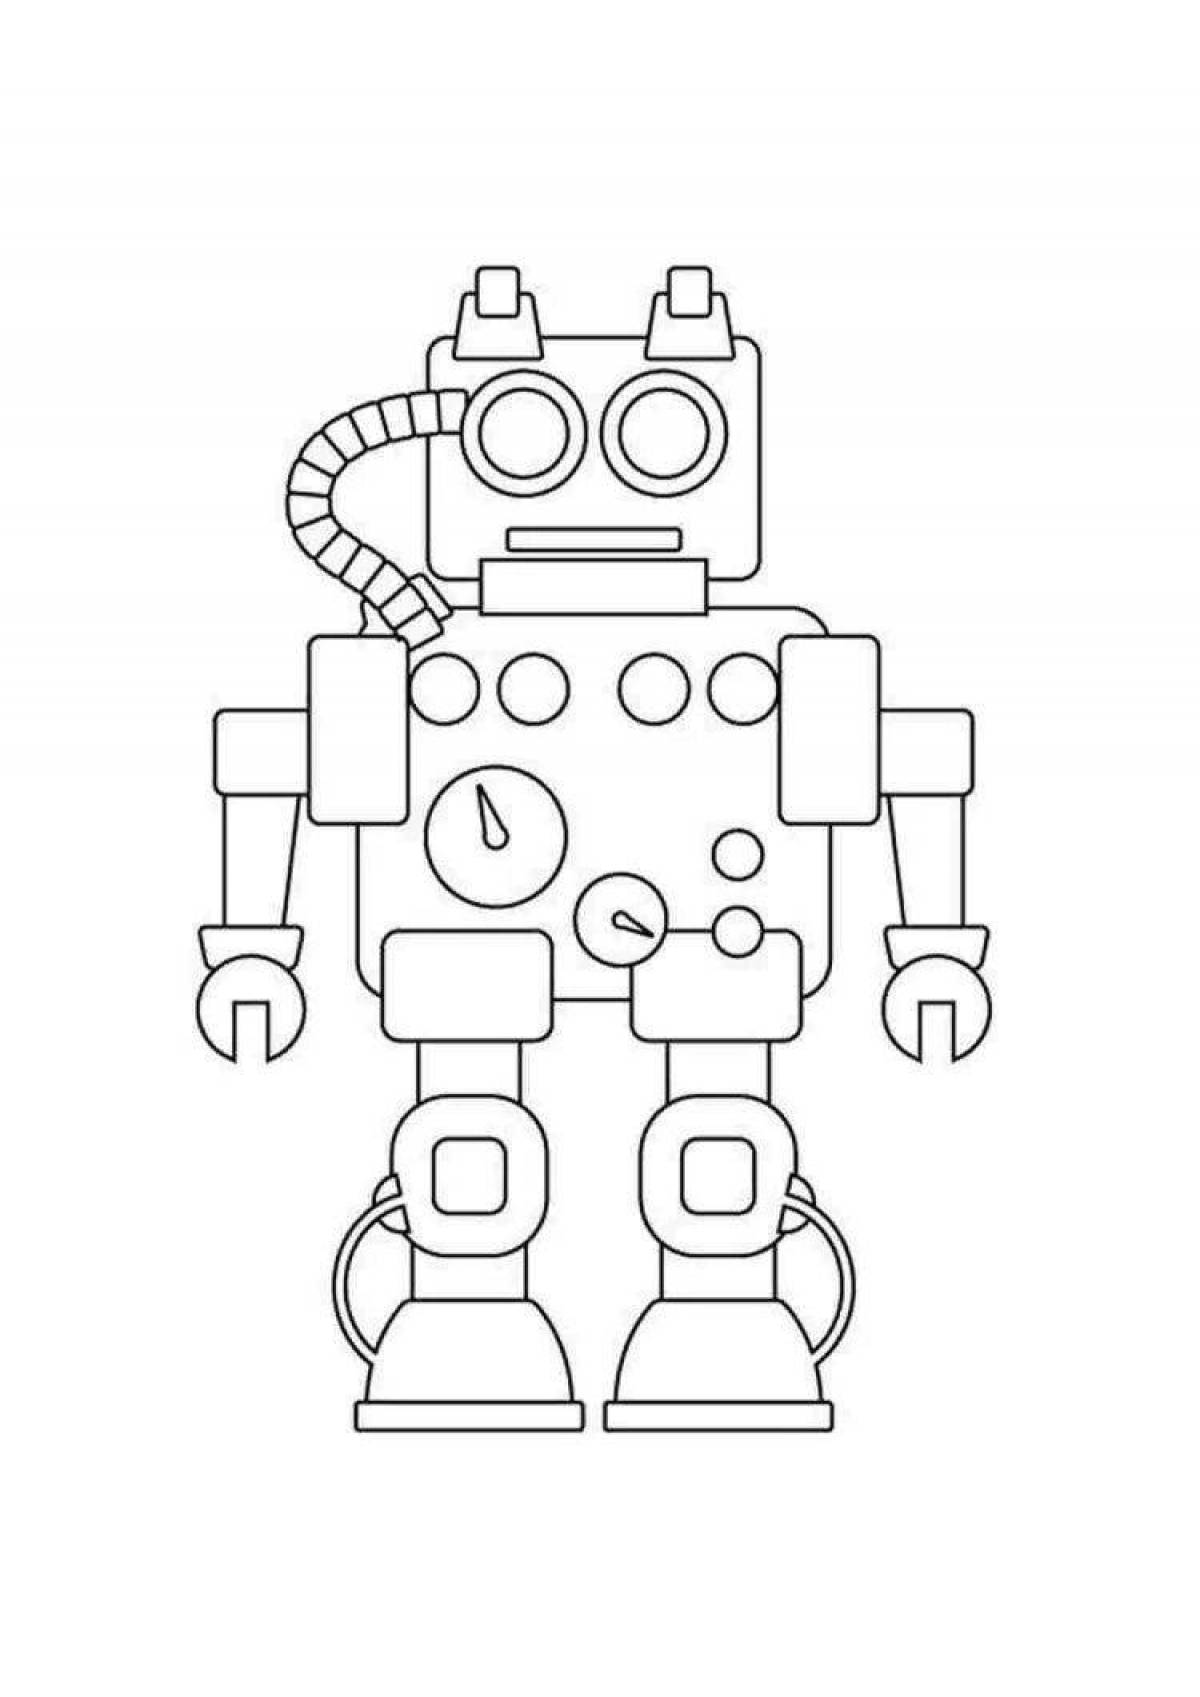 Coloring book for a complex printing robot